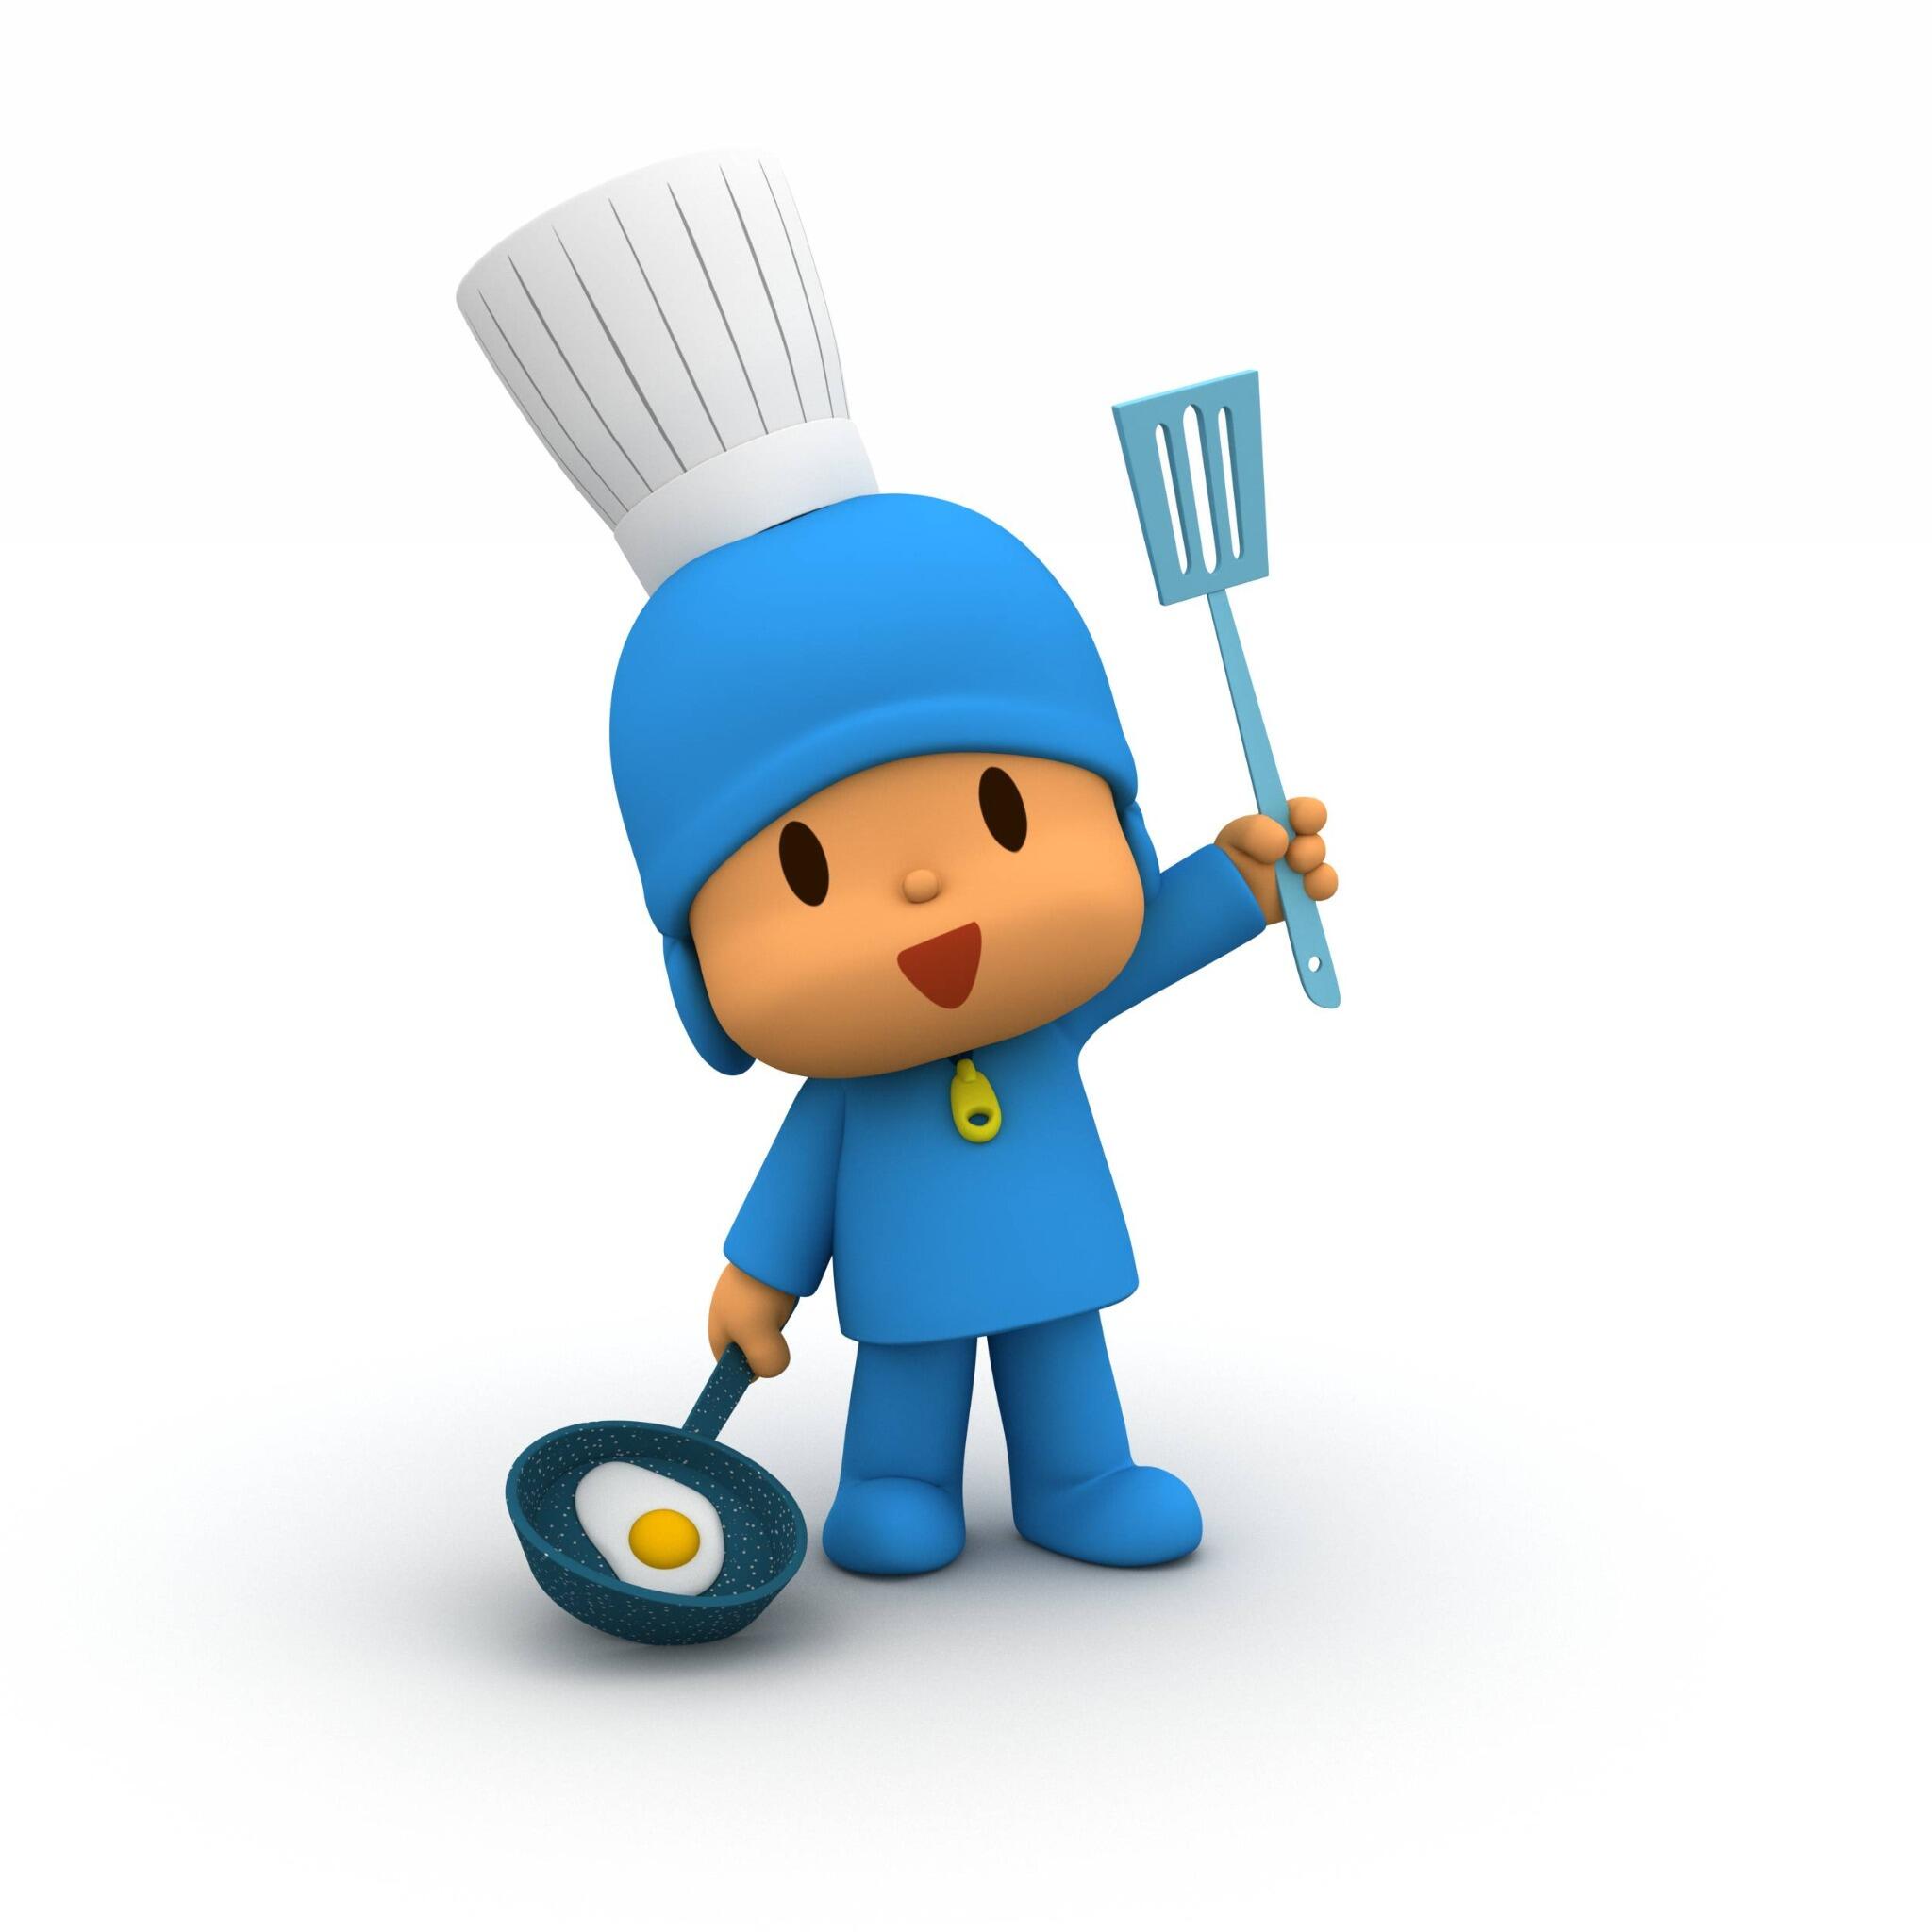 Pocoyo on Twitter: "#EATING is Super Fun!! Let's help our #PARENTS with